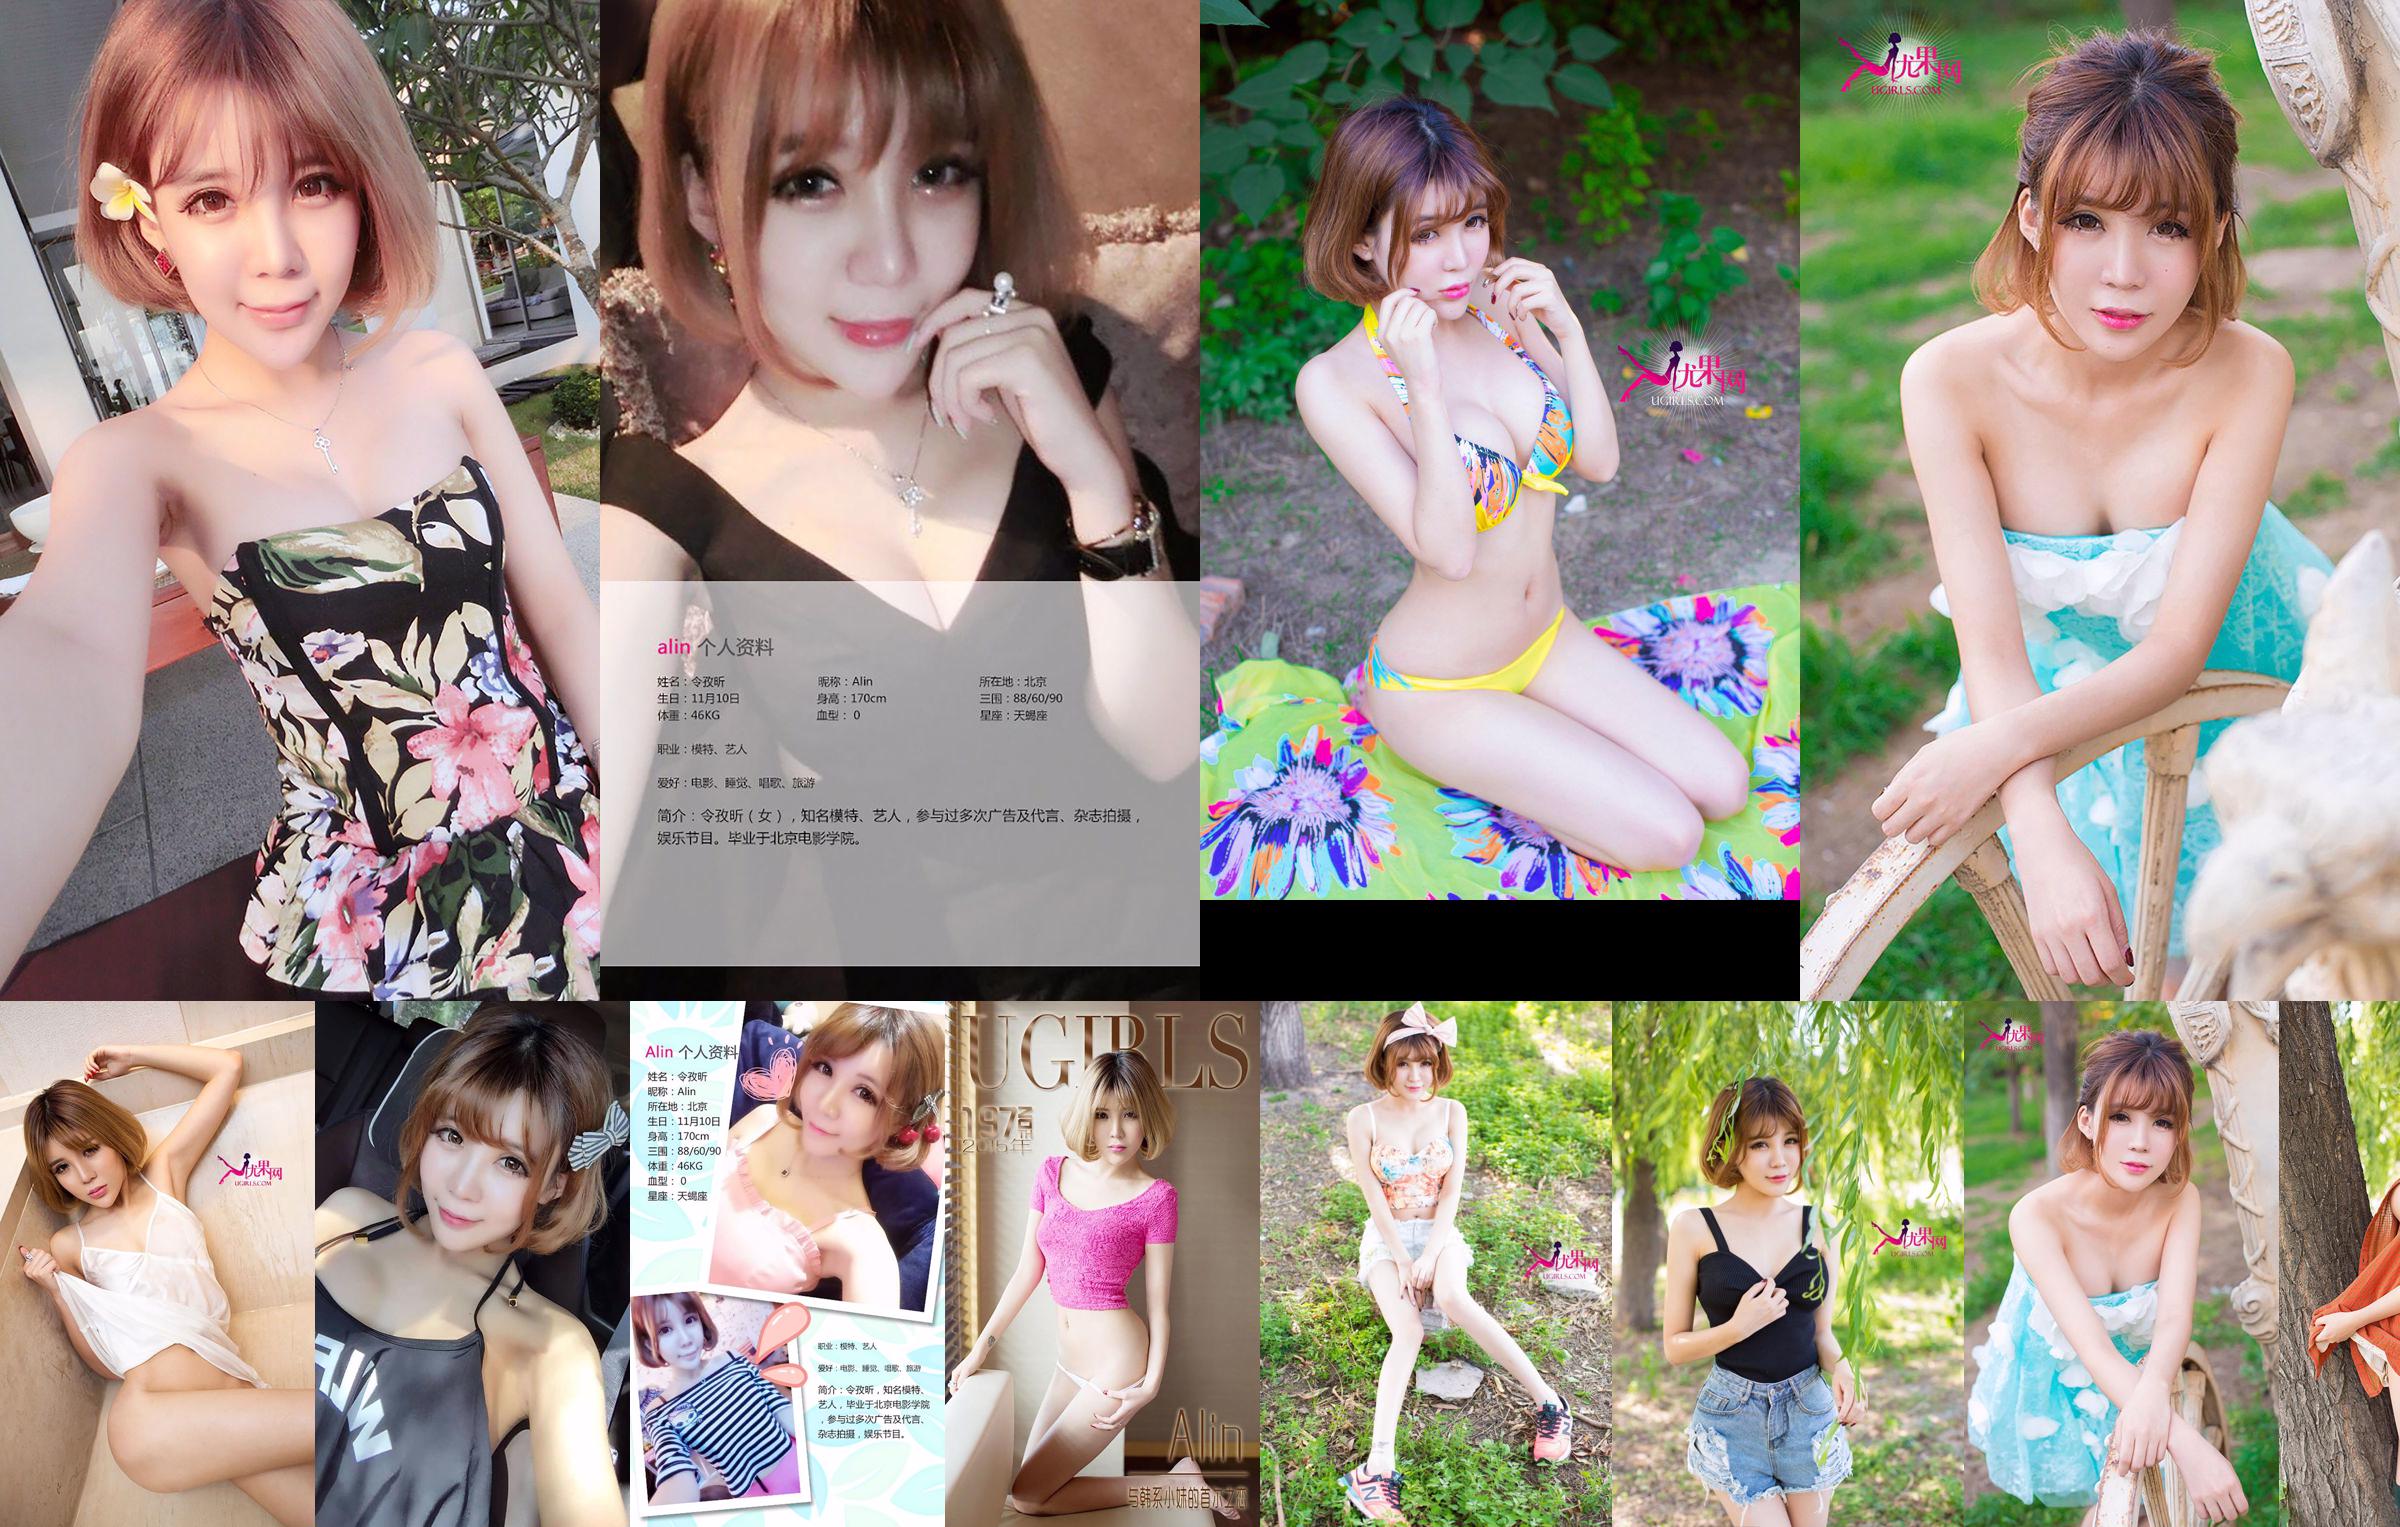 Ling Zixin Alin "Sunshine on the Edge, Bright Smiling Face" [爱优物Ugirls] No.054 No.3456cb Page 1